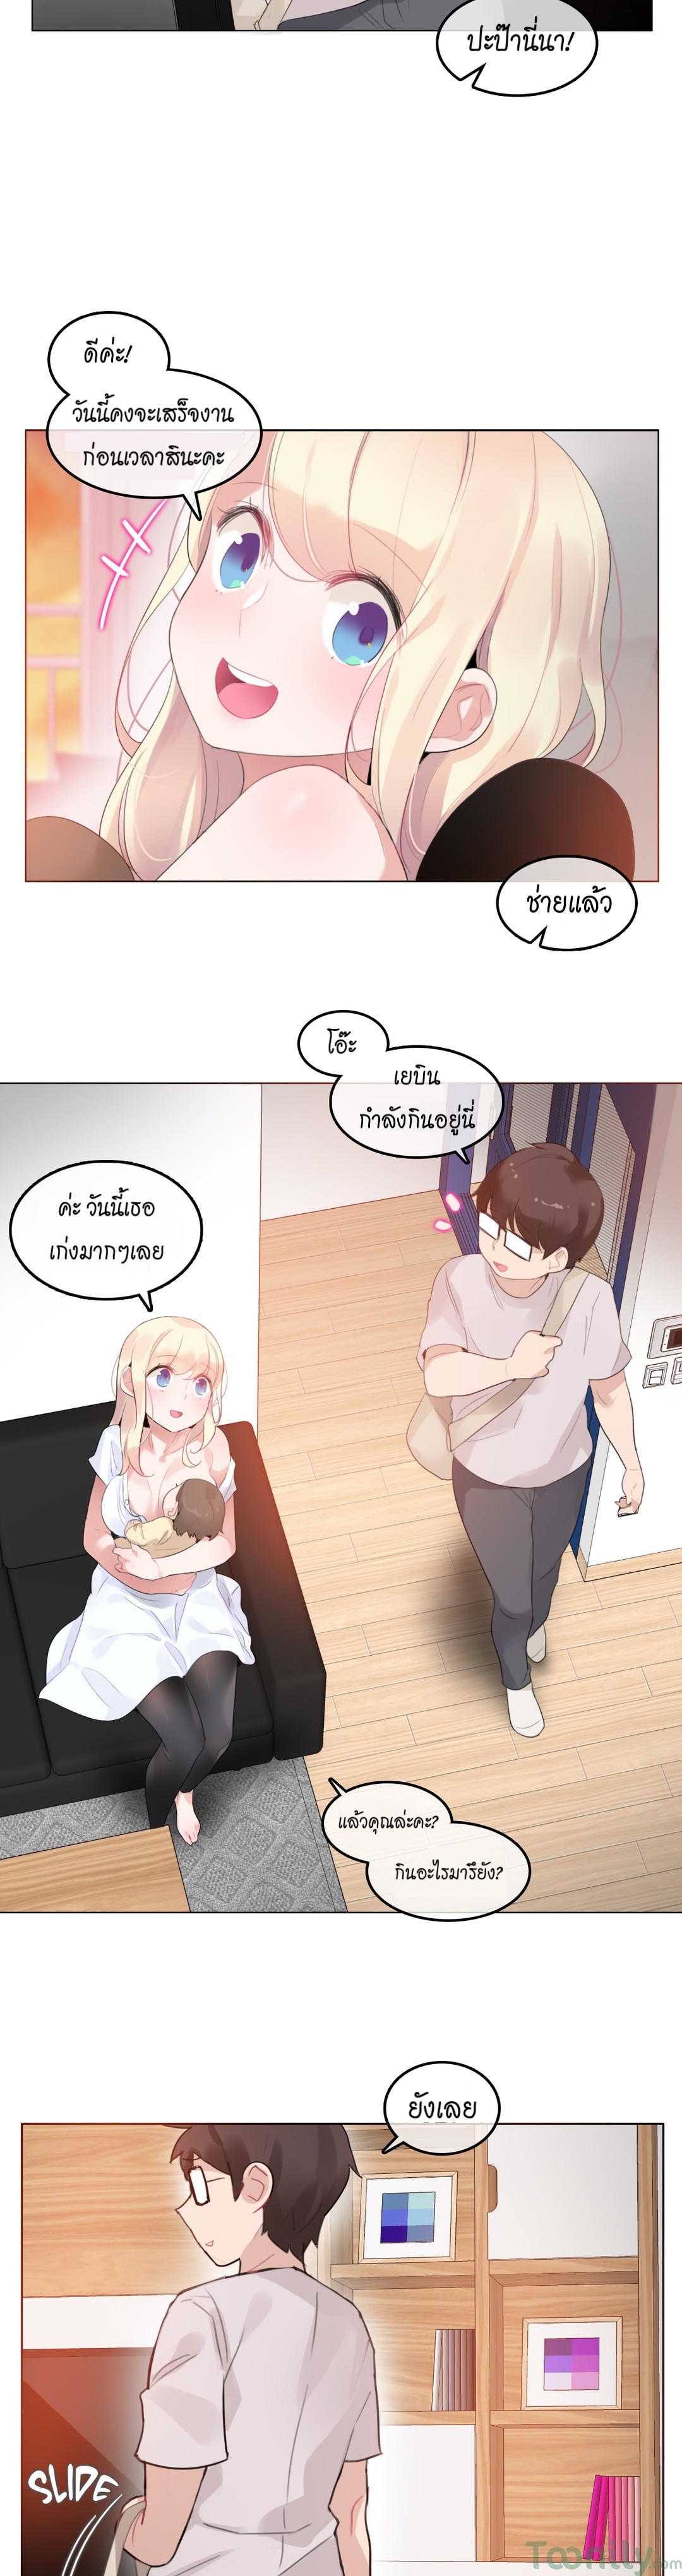 A Pervert’s Daily Life59 (2)